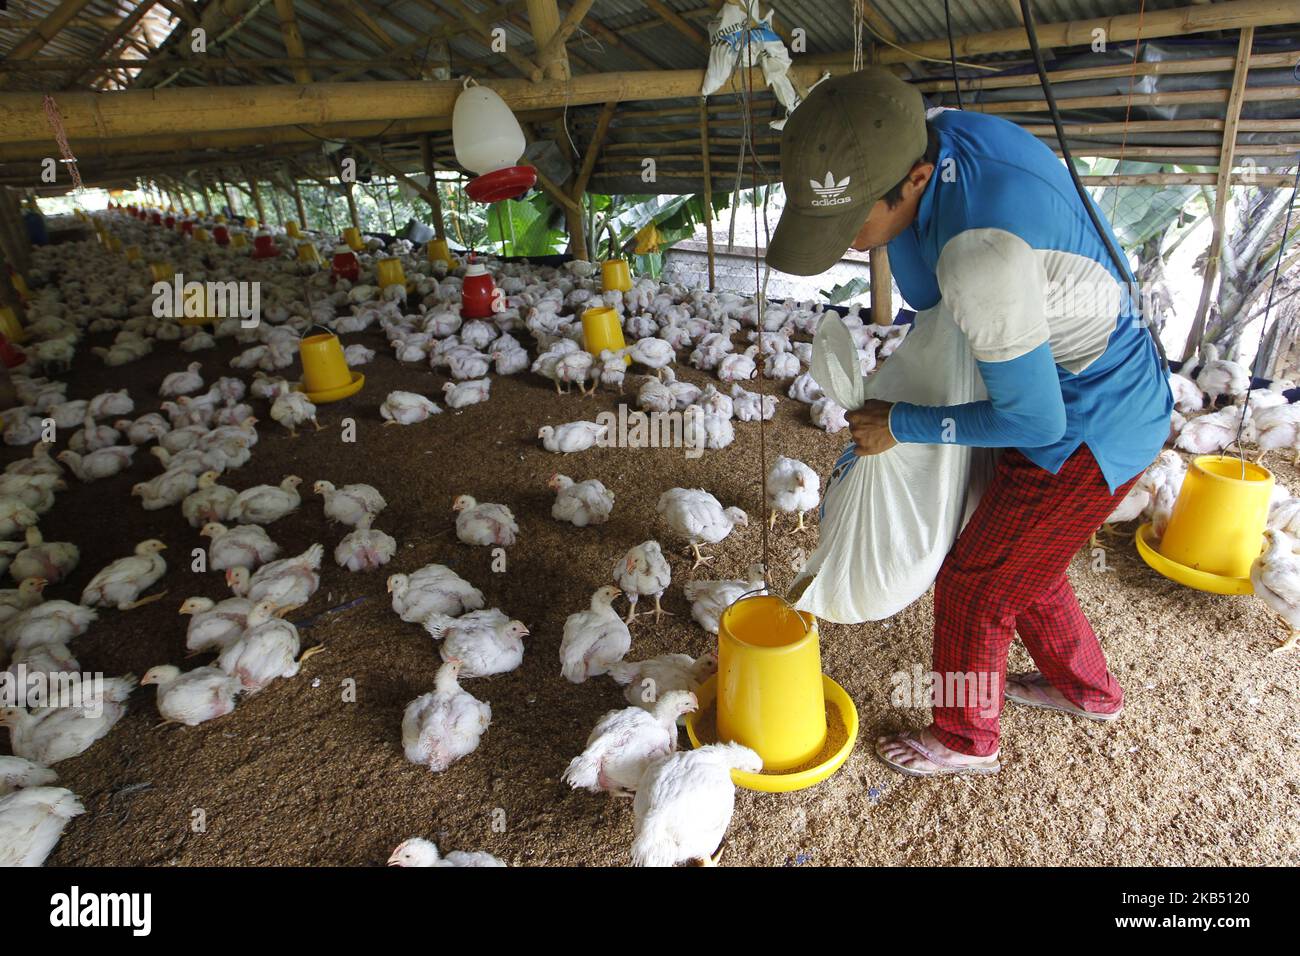 Chickens are seen in a poultry farm in Bogor, West Java, Indonesia, on Tuesday, December 8, 2015. (Photo by Andrew Gal/NurPhoto) Stock Photo